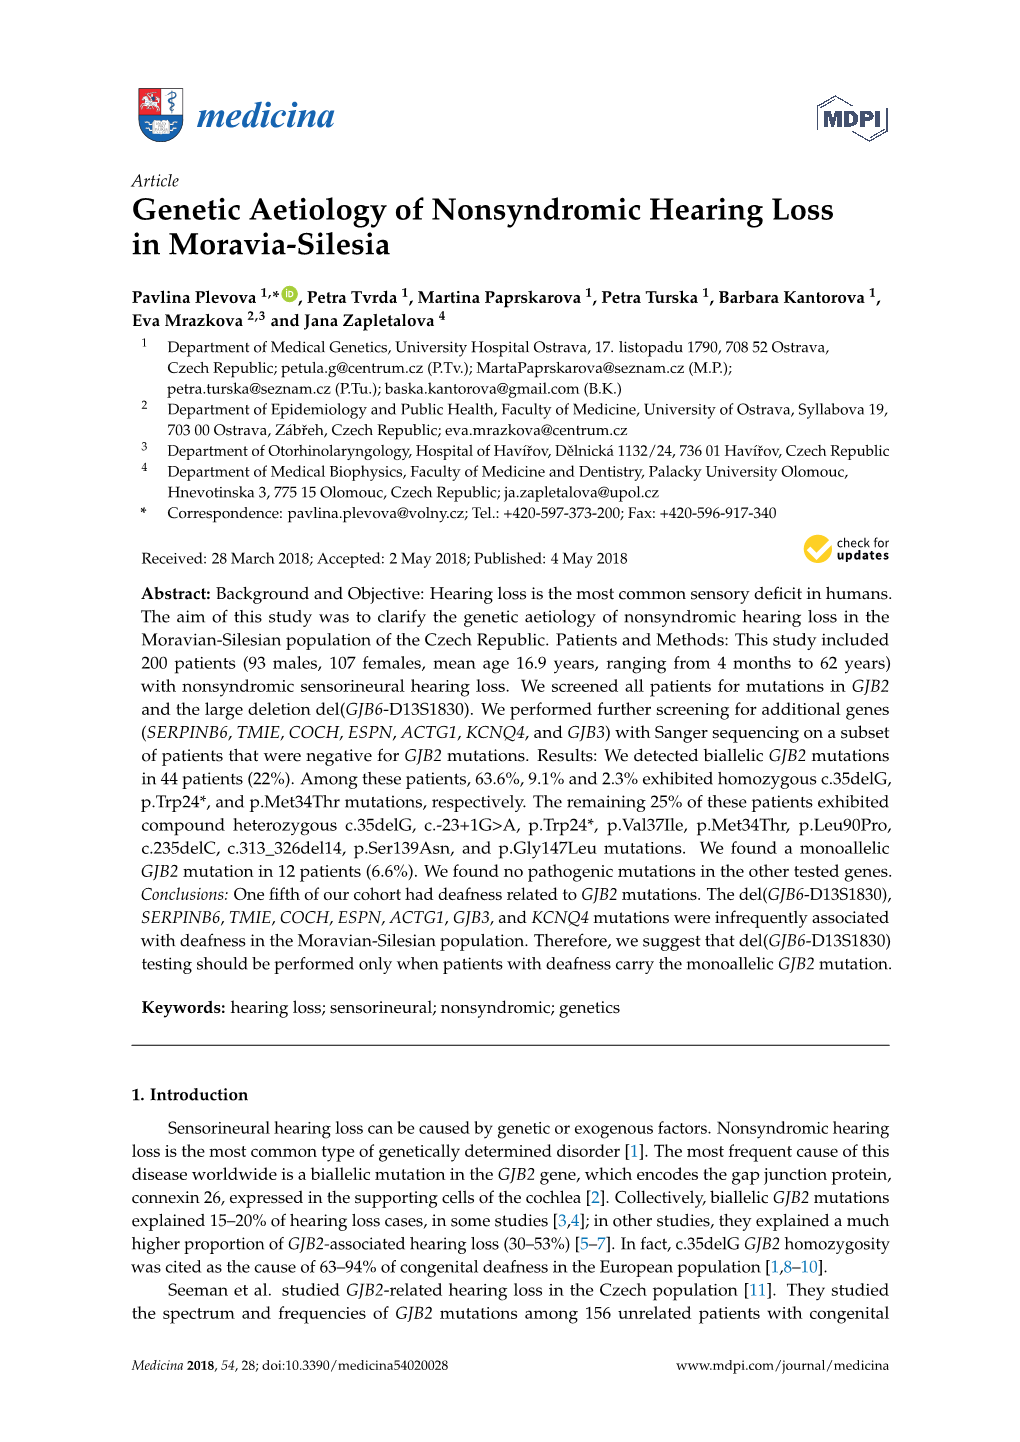 Genetic Aetiology of Nonsyndromic Hearing Loss in Moravia-Silesia